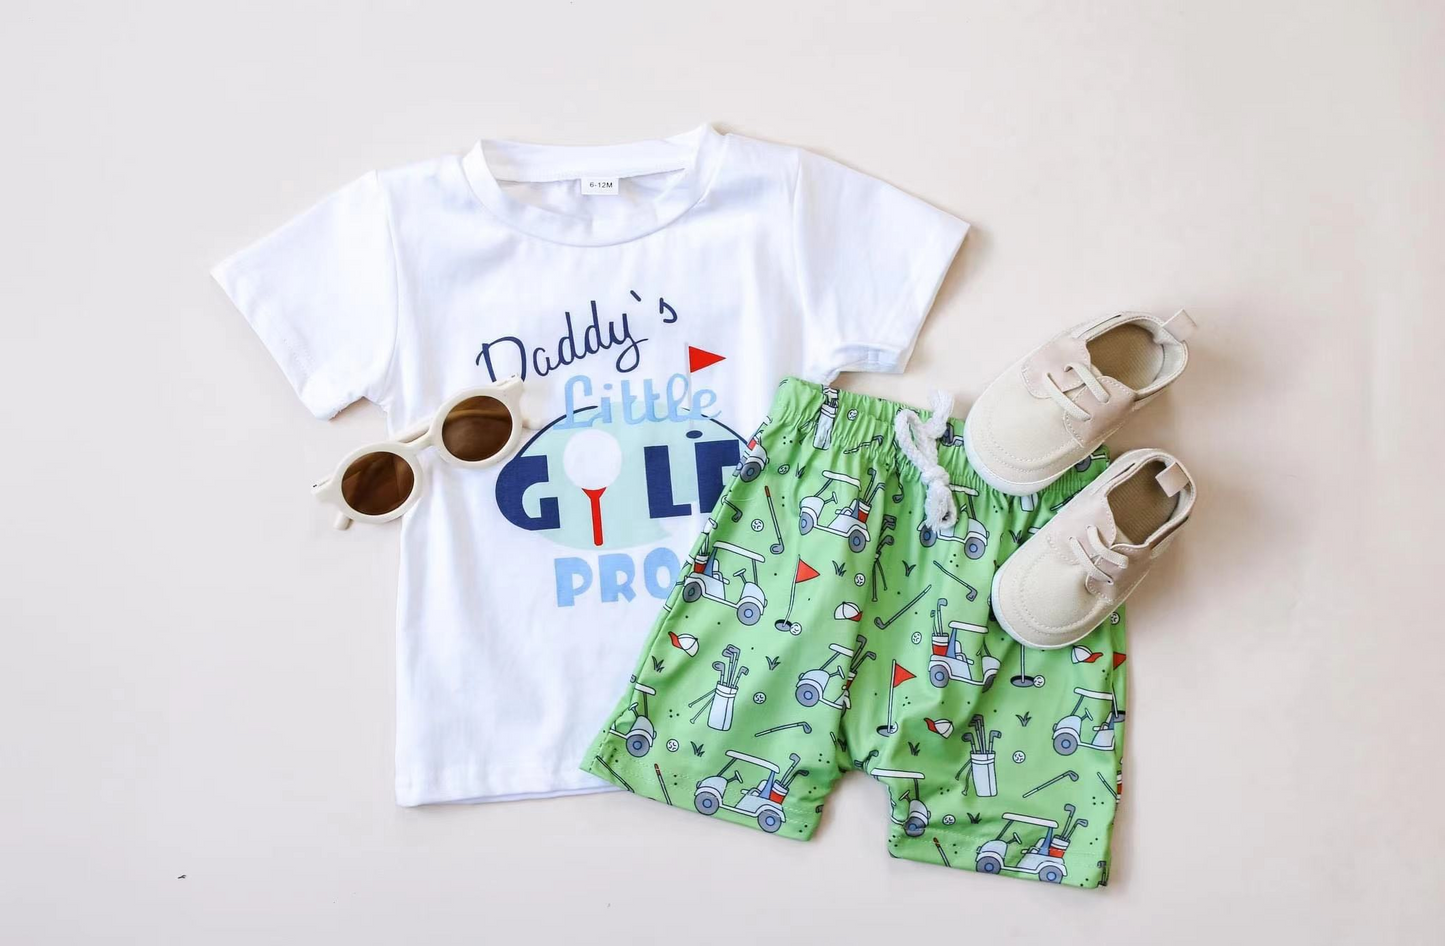 Baby Boys Daddy's Little Golf Bro Short Sleeve Shirts Tops Shorts Clothes Sets Preorder